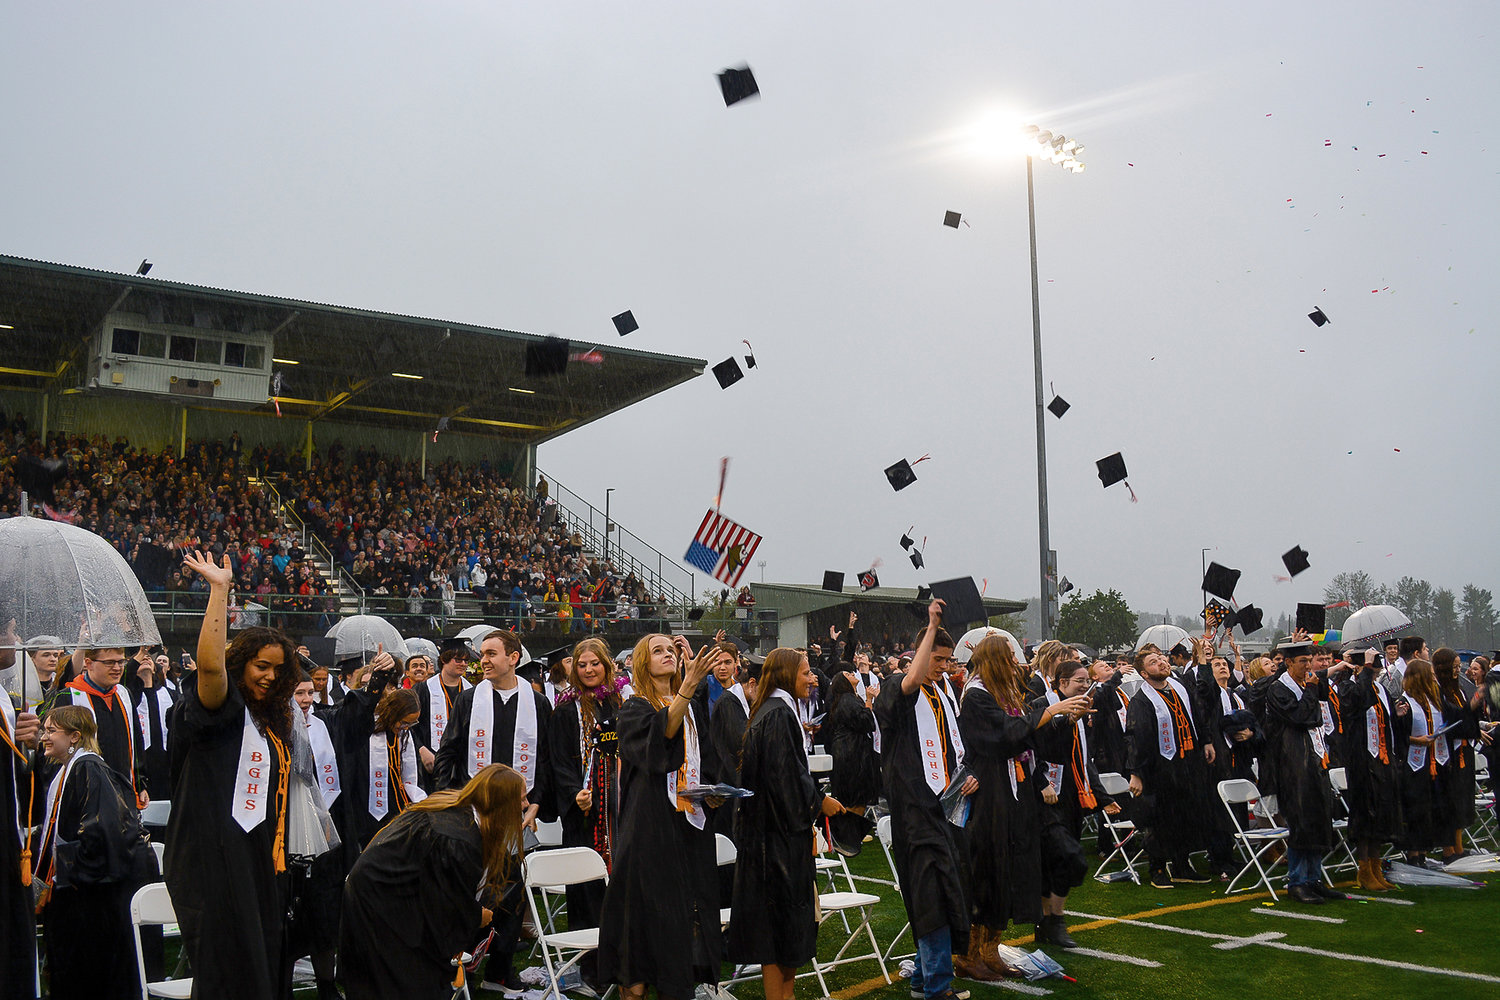 Battle Ground High School’s Class of 2022 tosses their graduation caps in the air before saying goodbye at their graduation ceremony in Battle Ground on June 10.